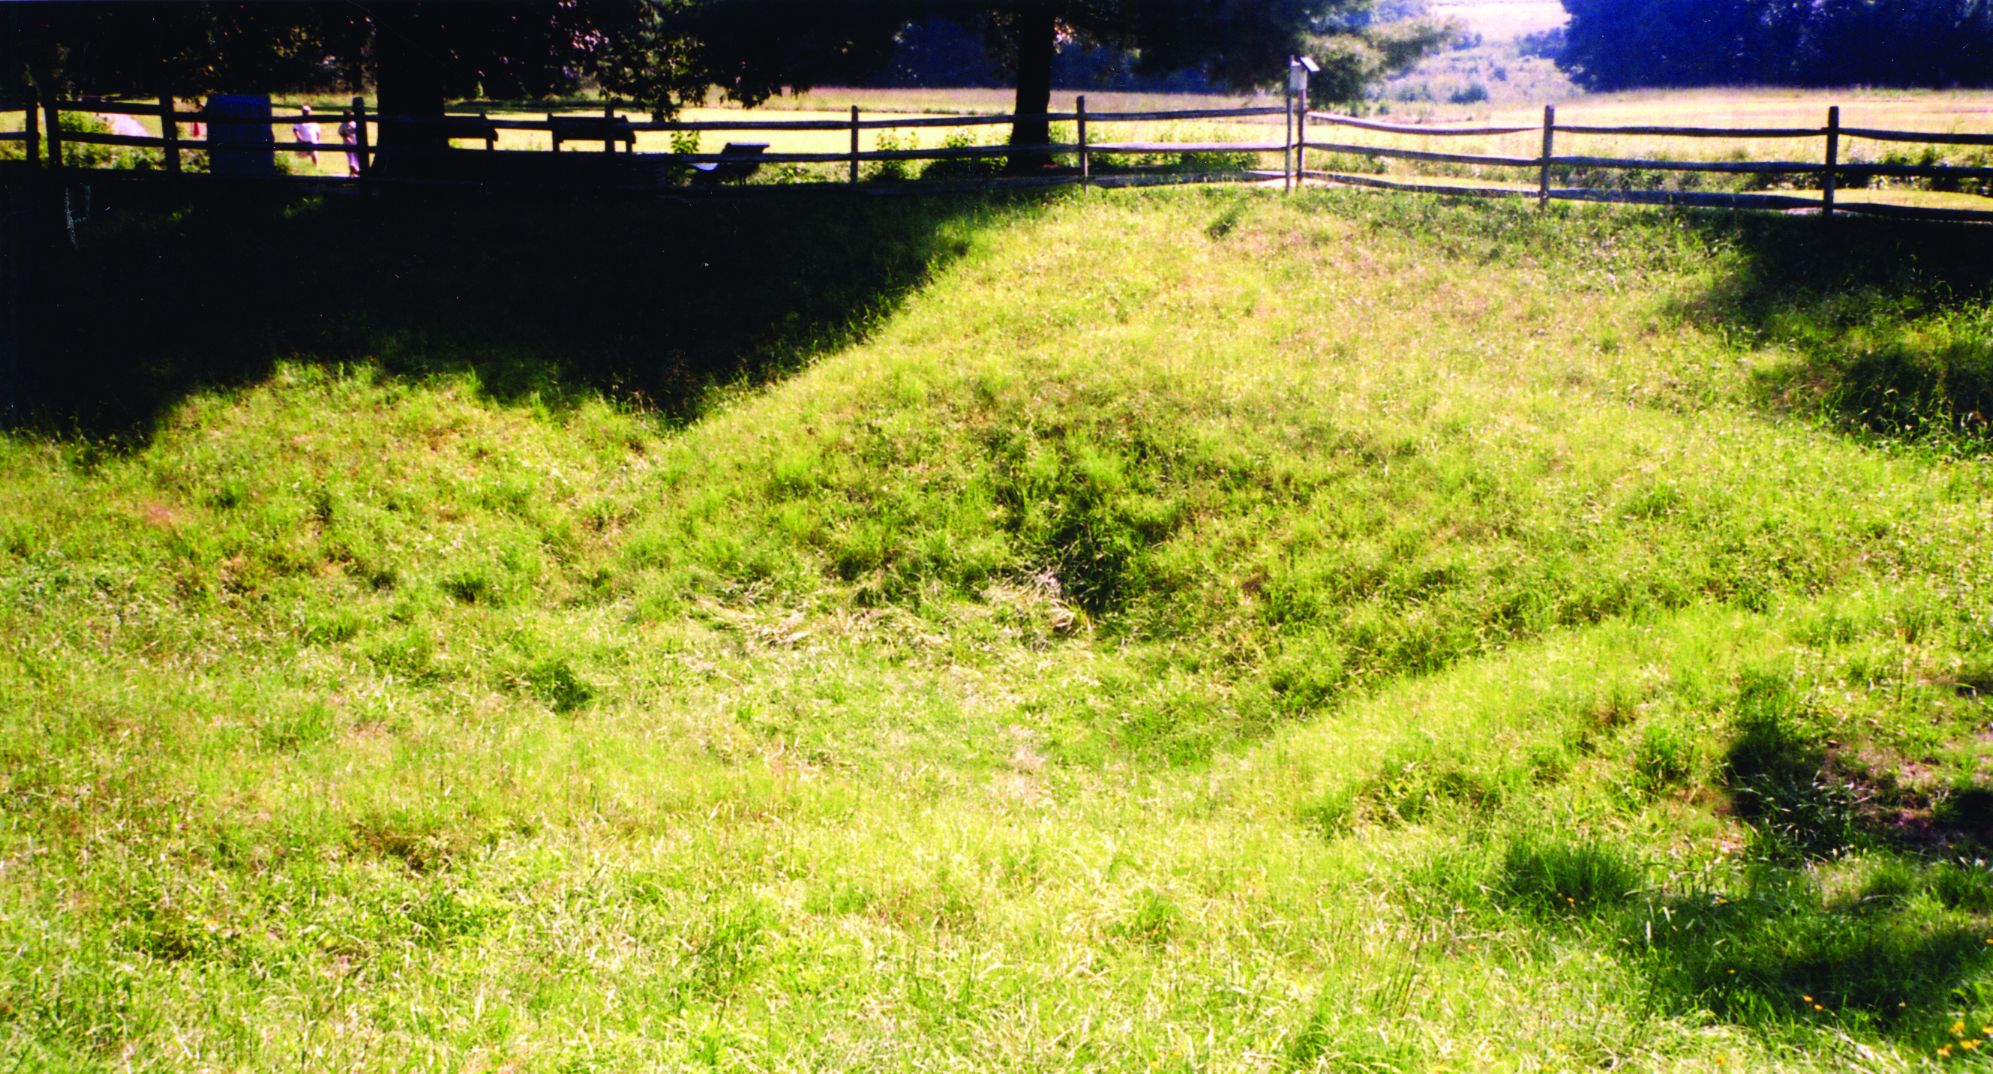 The crater is not a perfect hole and seems to be a natural part of the terrain at the National Battlefield Park.